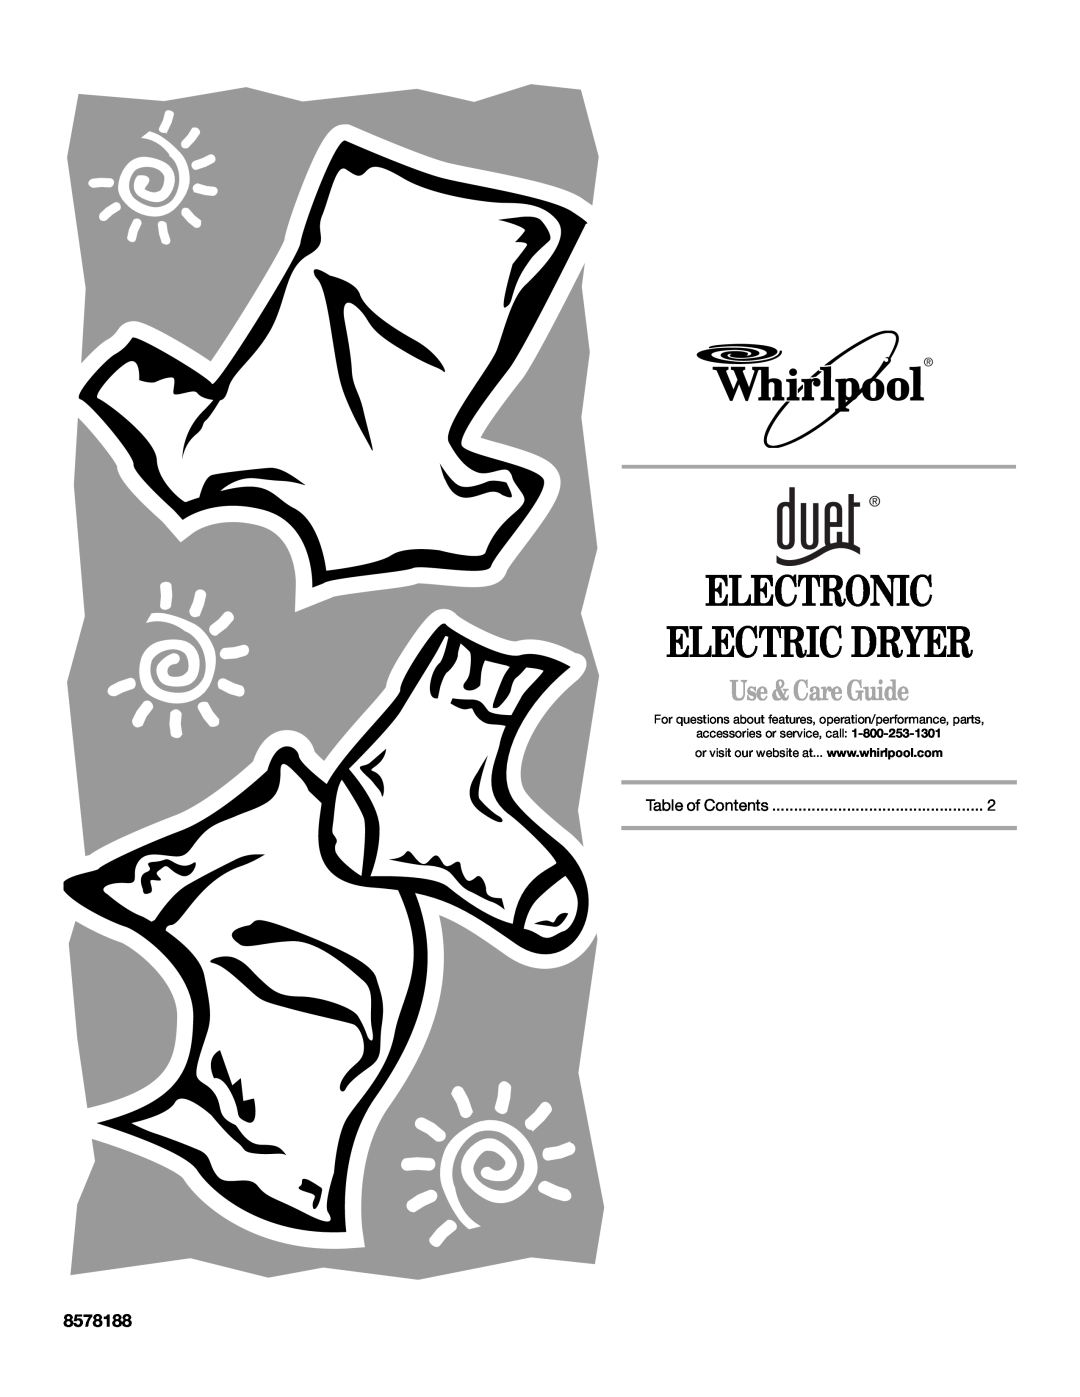 Whirlpool GEW9260PL1 manual 8578188, Electronic Electric Dryer, Use & Care Guide, accessories or service, call 